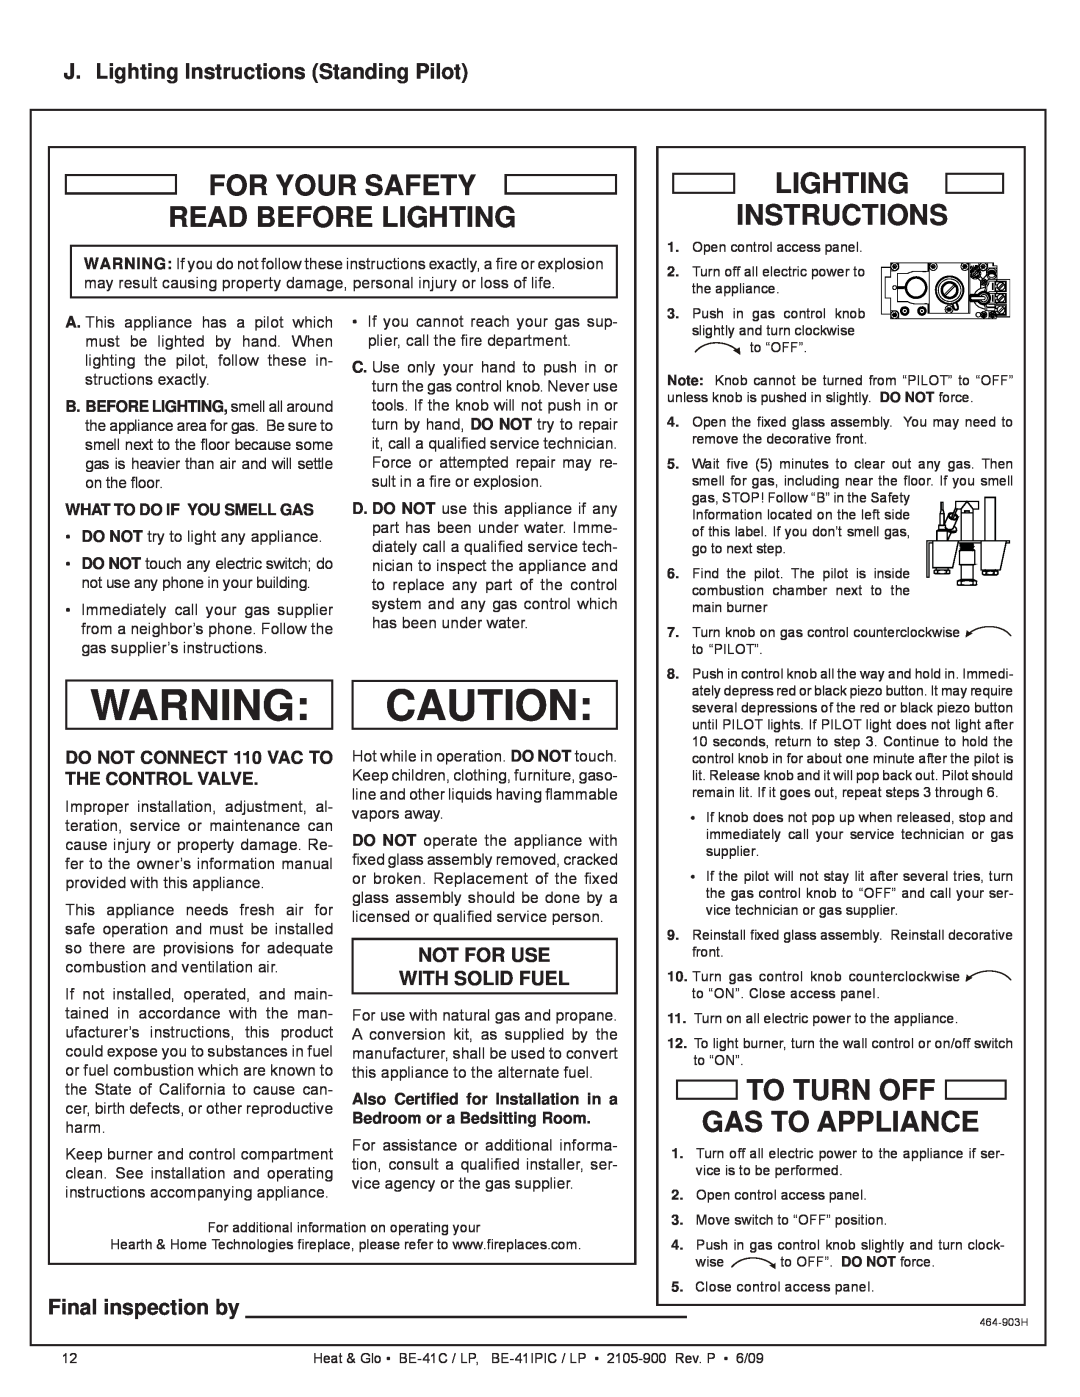 Heat & Glo LifeStyle BE-41C J. Lighting Instructions Standing Pilot, Warning Caution, To Turn Off Gas To Appliance 